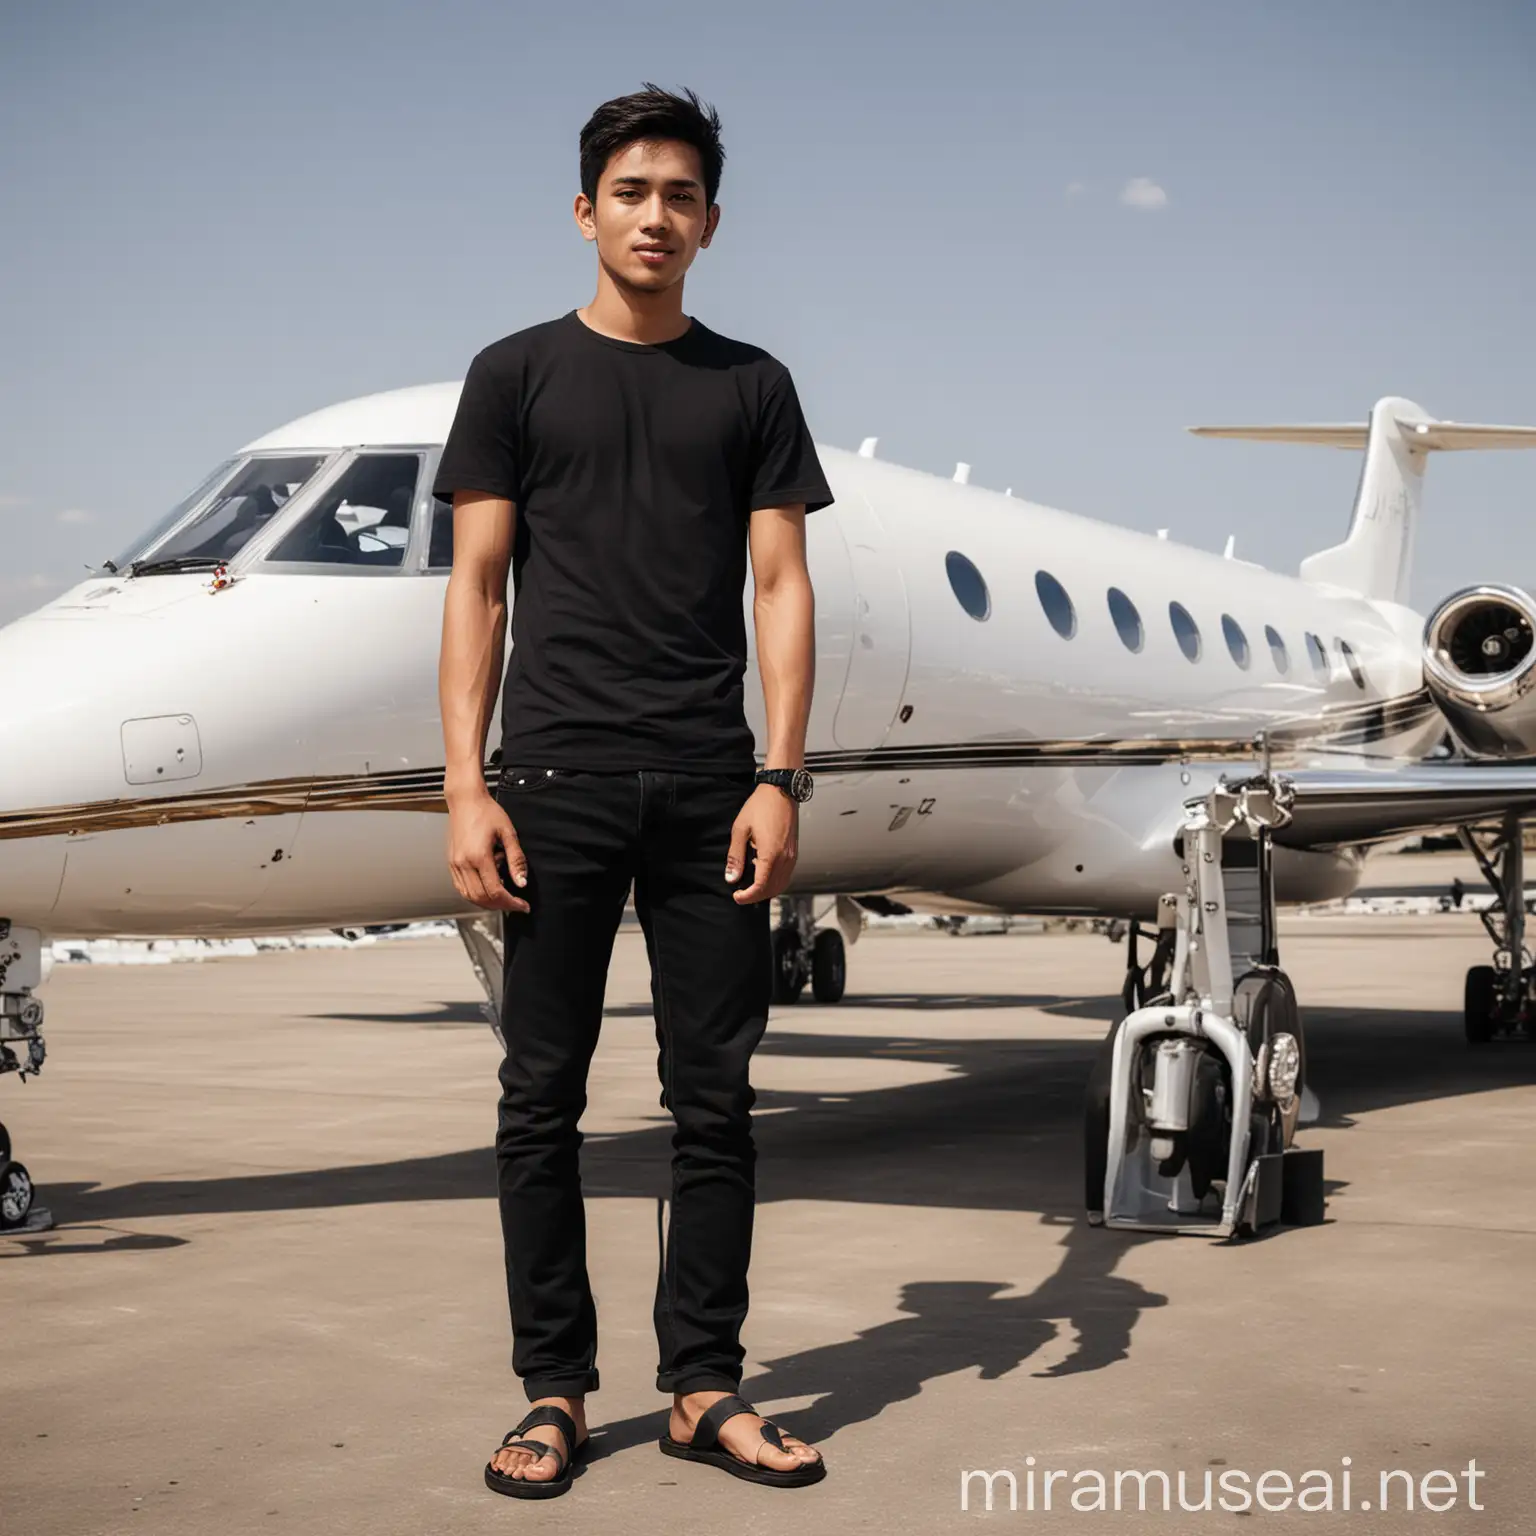 Young Javanese Man Standing by Private Jet in Casual Attire